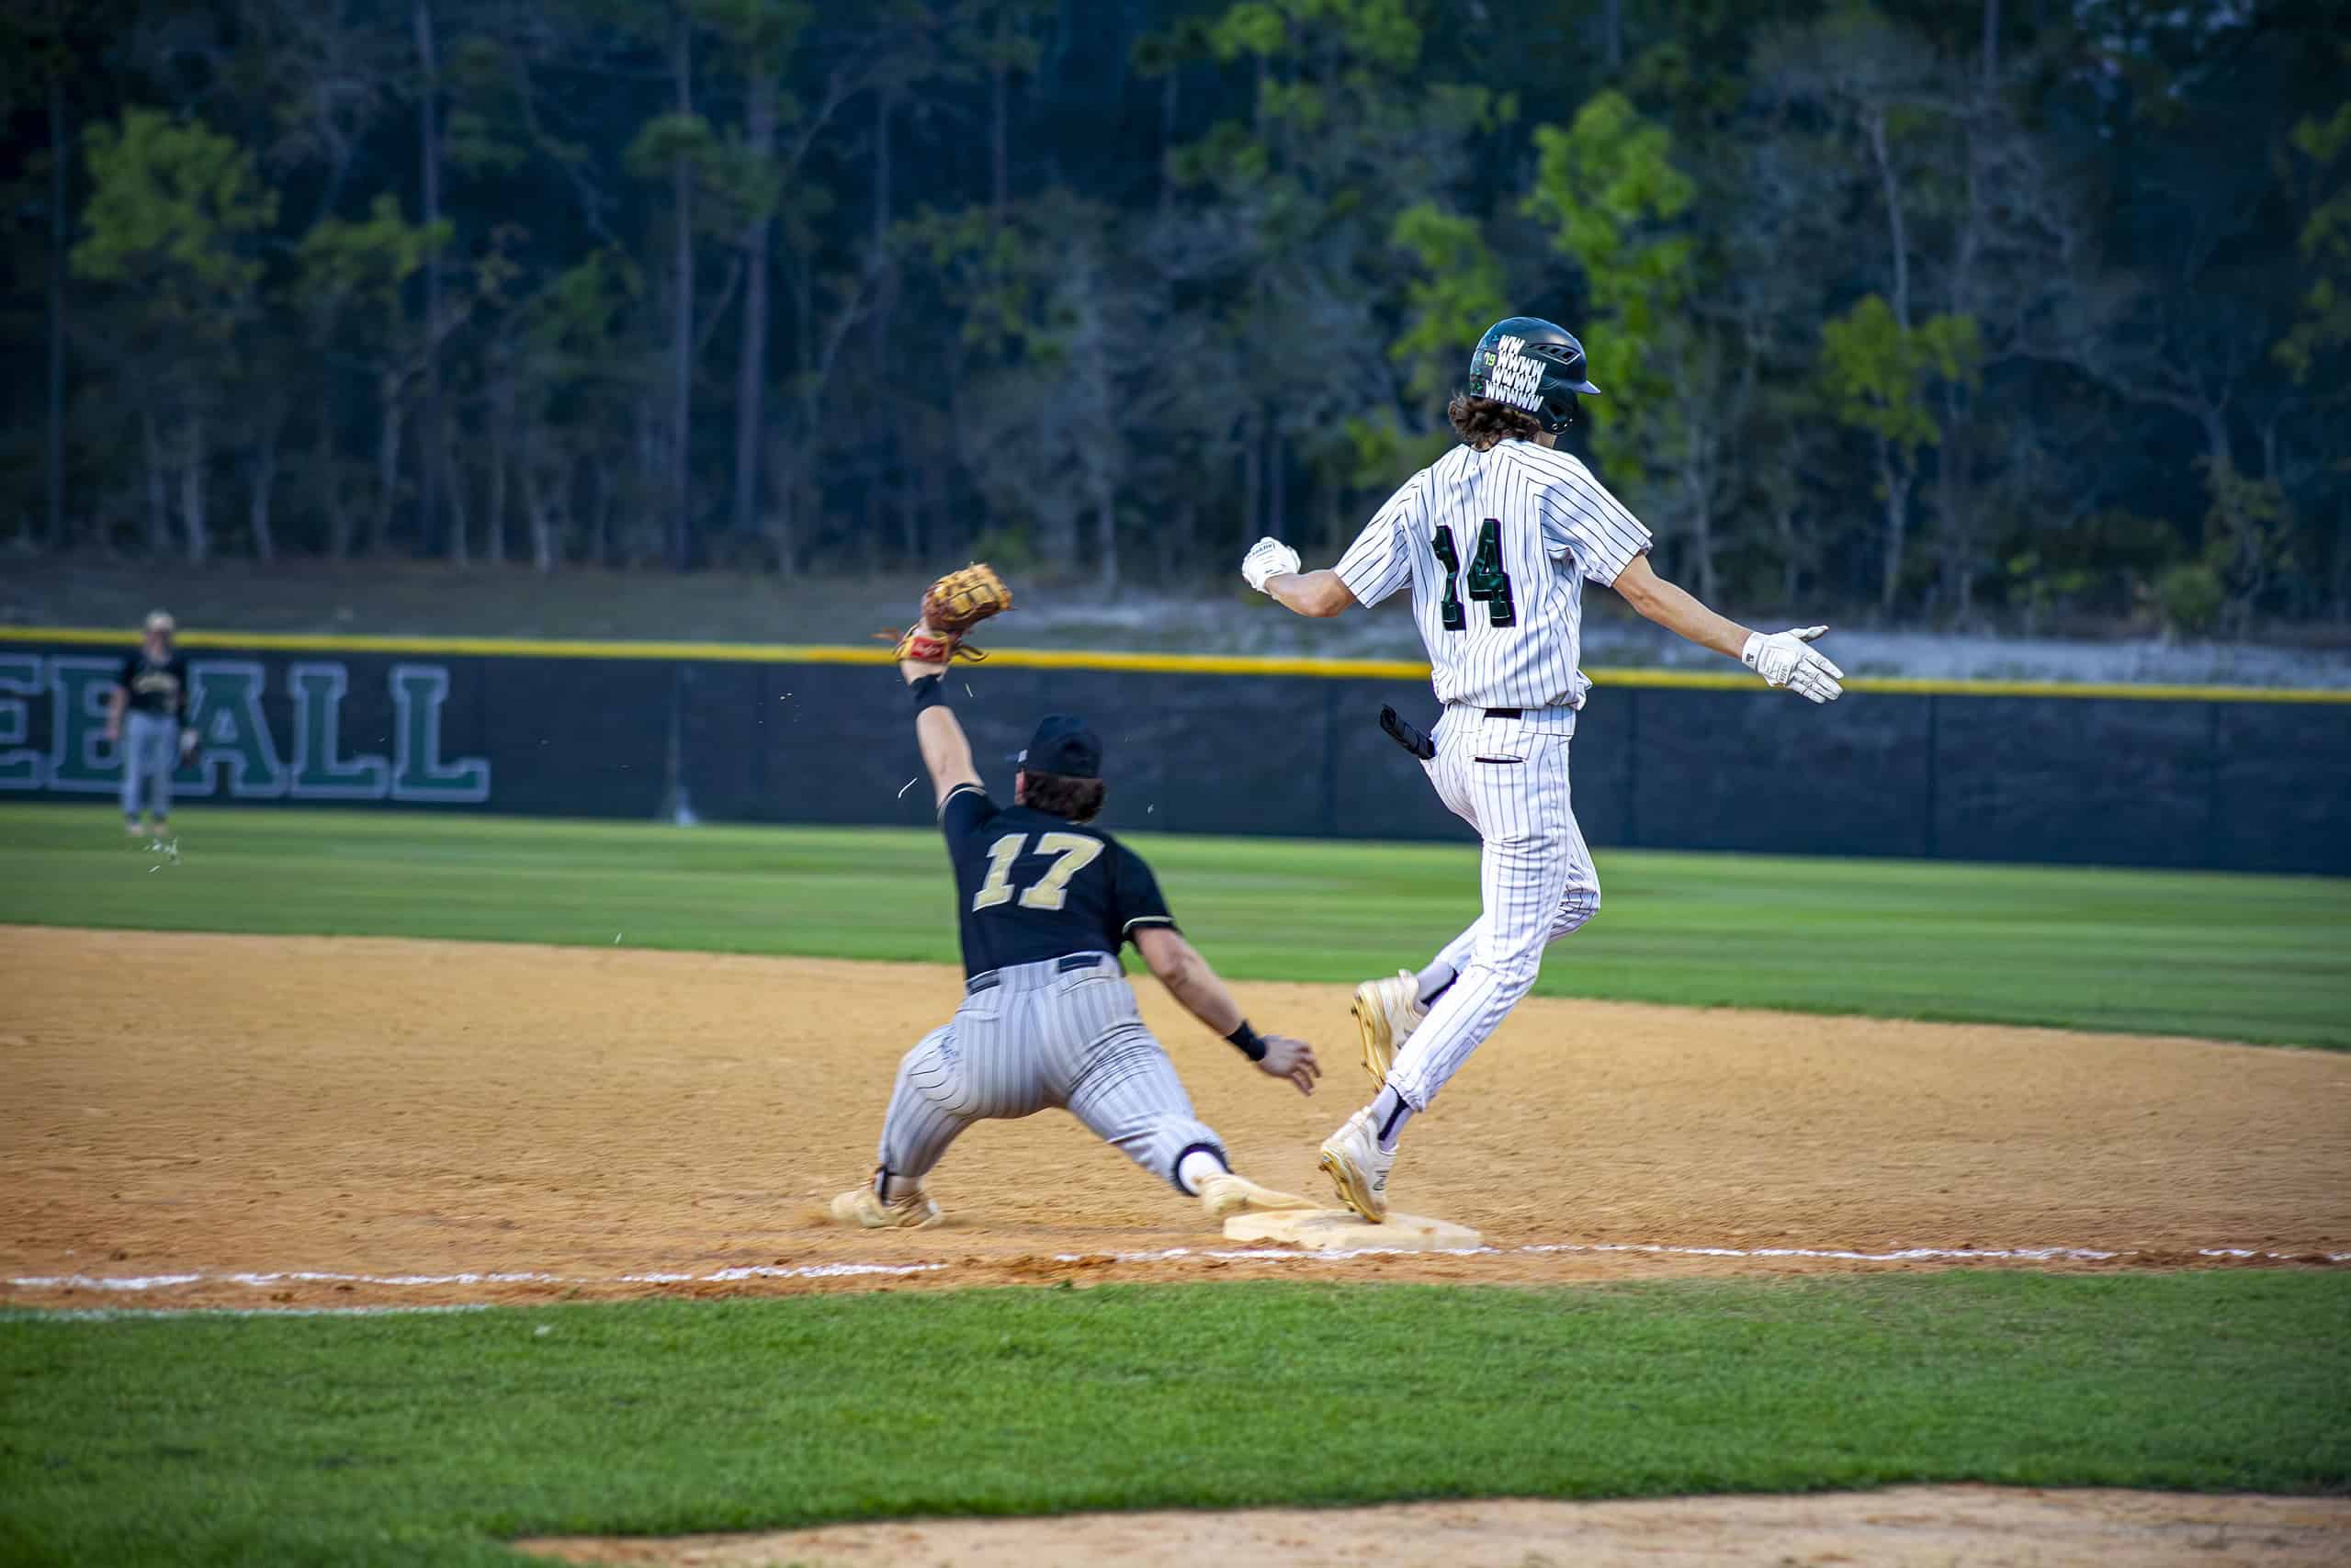 Citrus's Austin Barry stretches to catch the ball while Weeki Wachee's Jack Strong runs to first base. [Photo by Hanna Maglio]